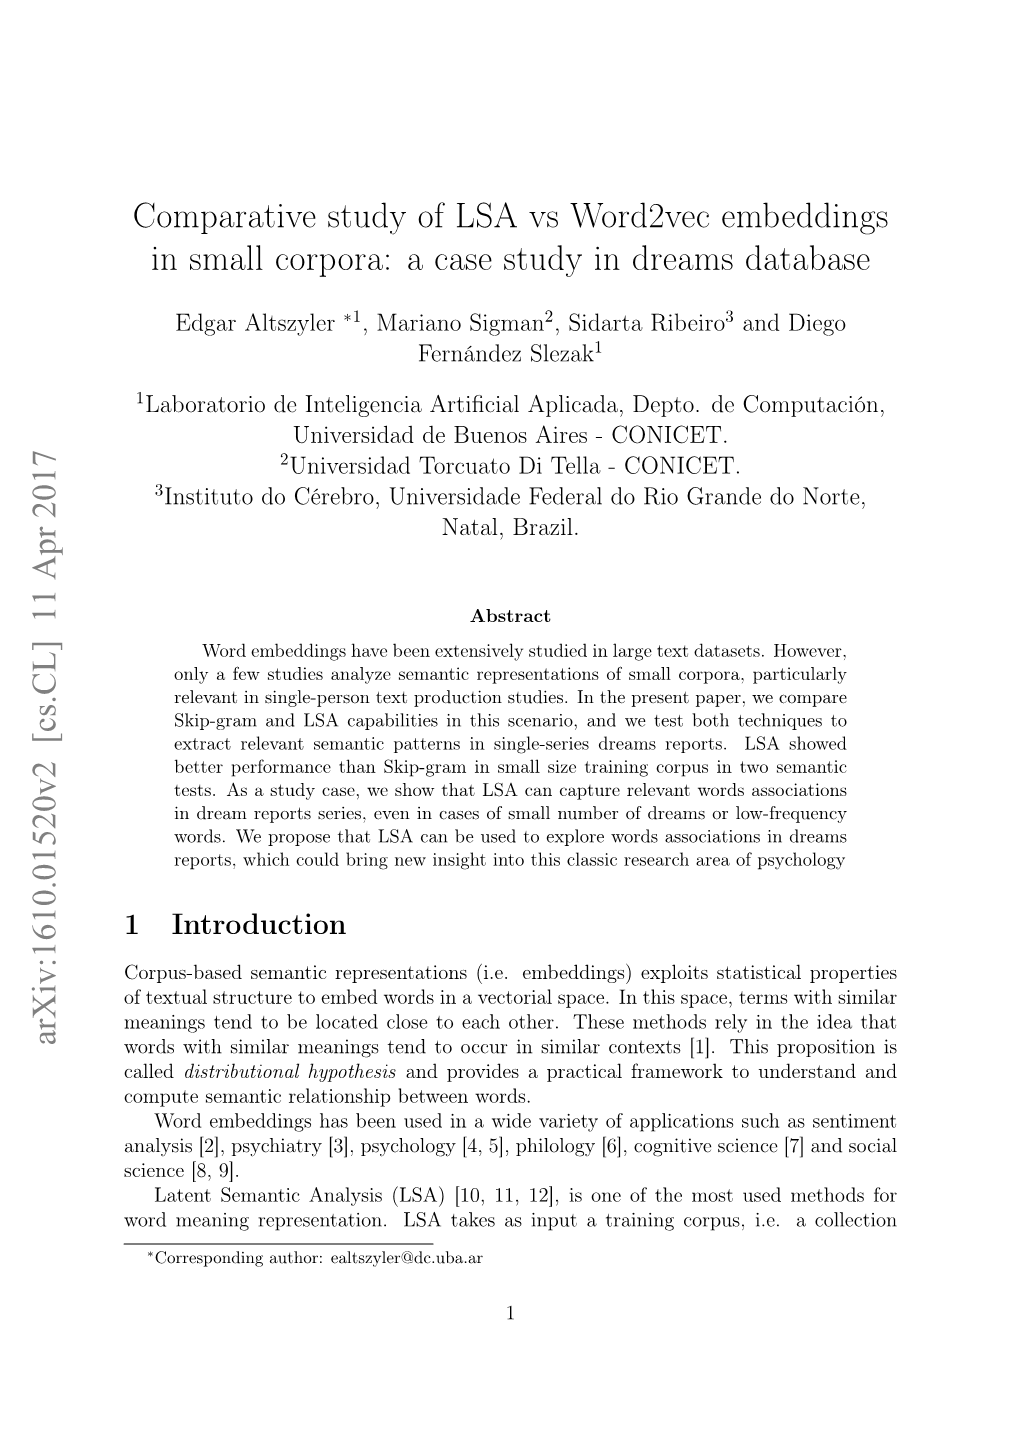 Comparative Study of LSA Vs Word2vec Embeddings in Small Corpora: a Case Study in Dreams Database